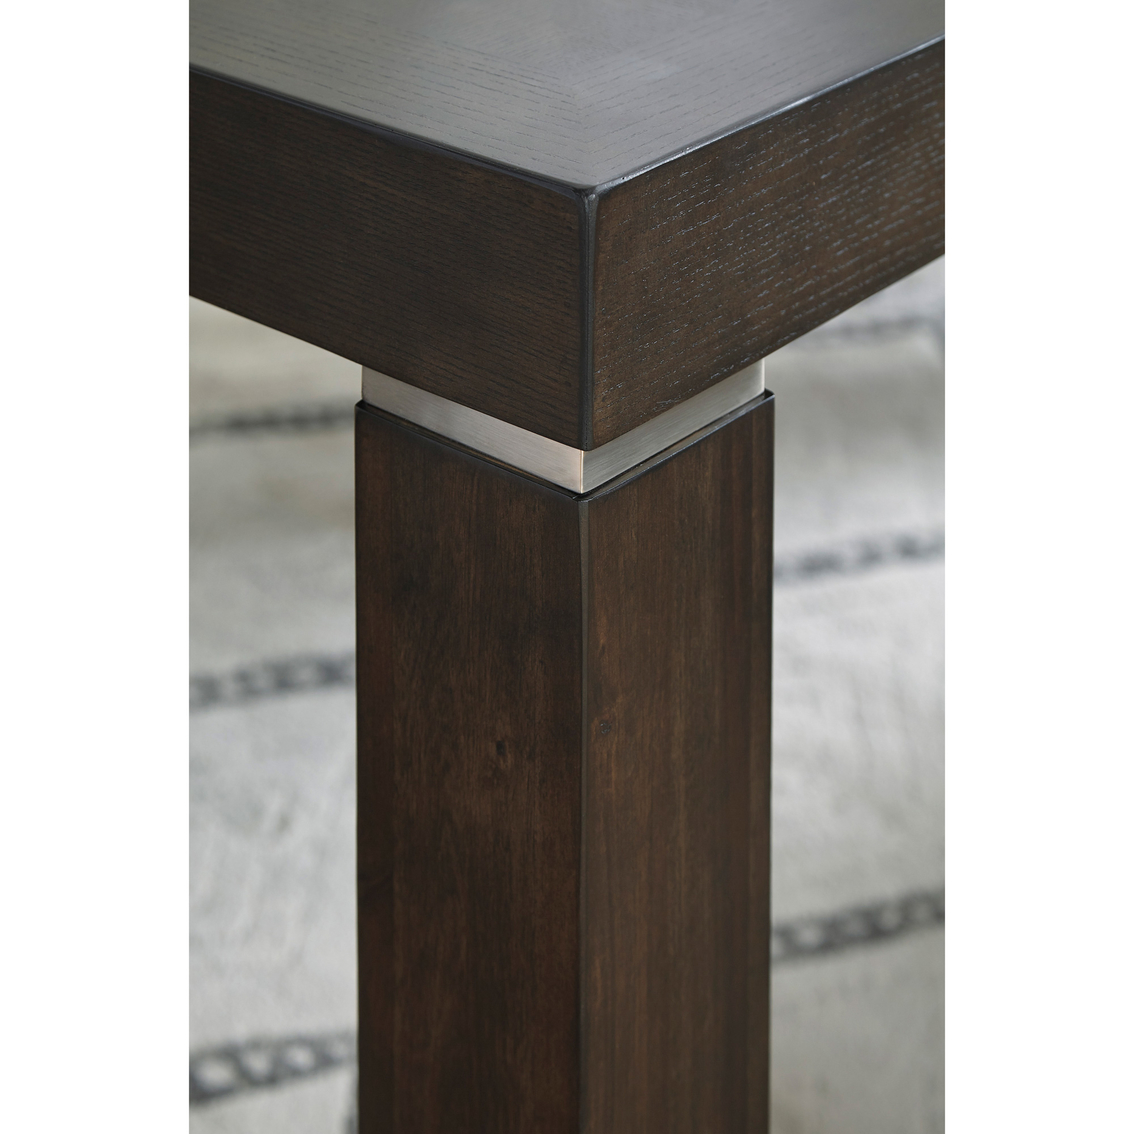 Signature Design by Ashley Hyndell Rectangular Dining Room Extension Table - Image 3 of 4